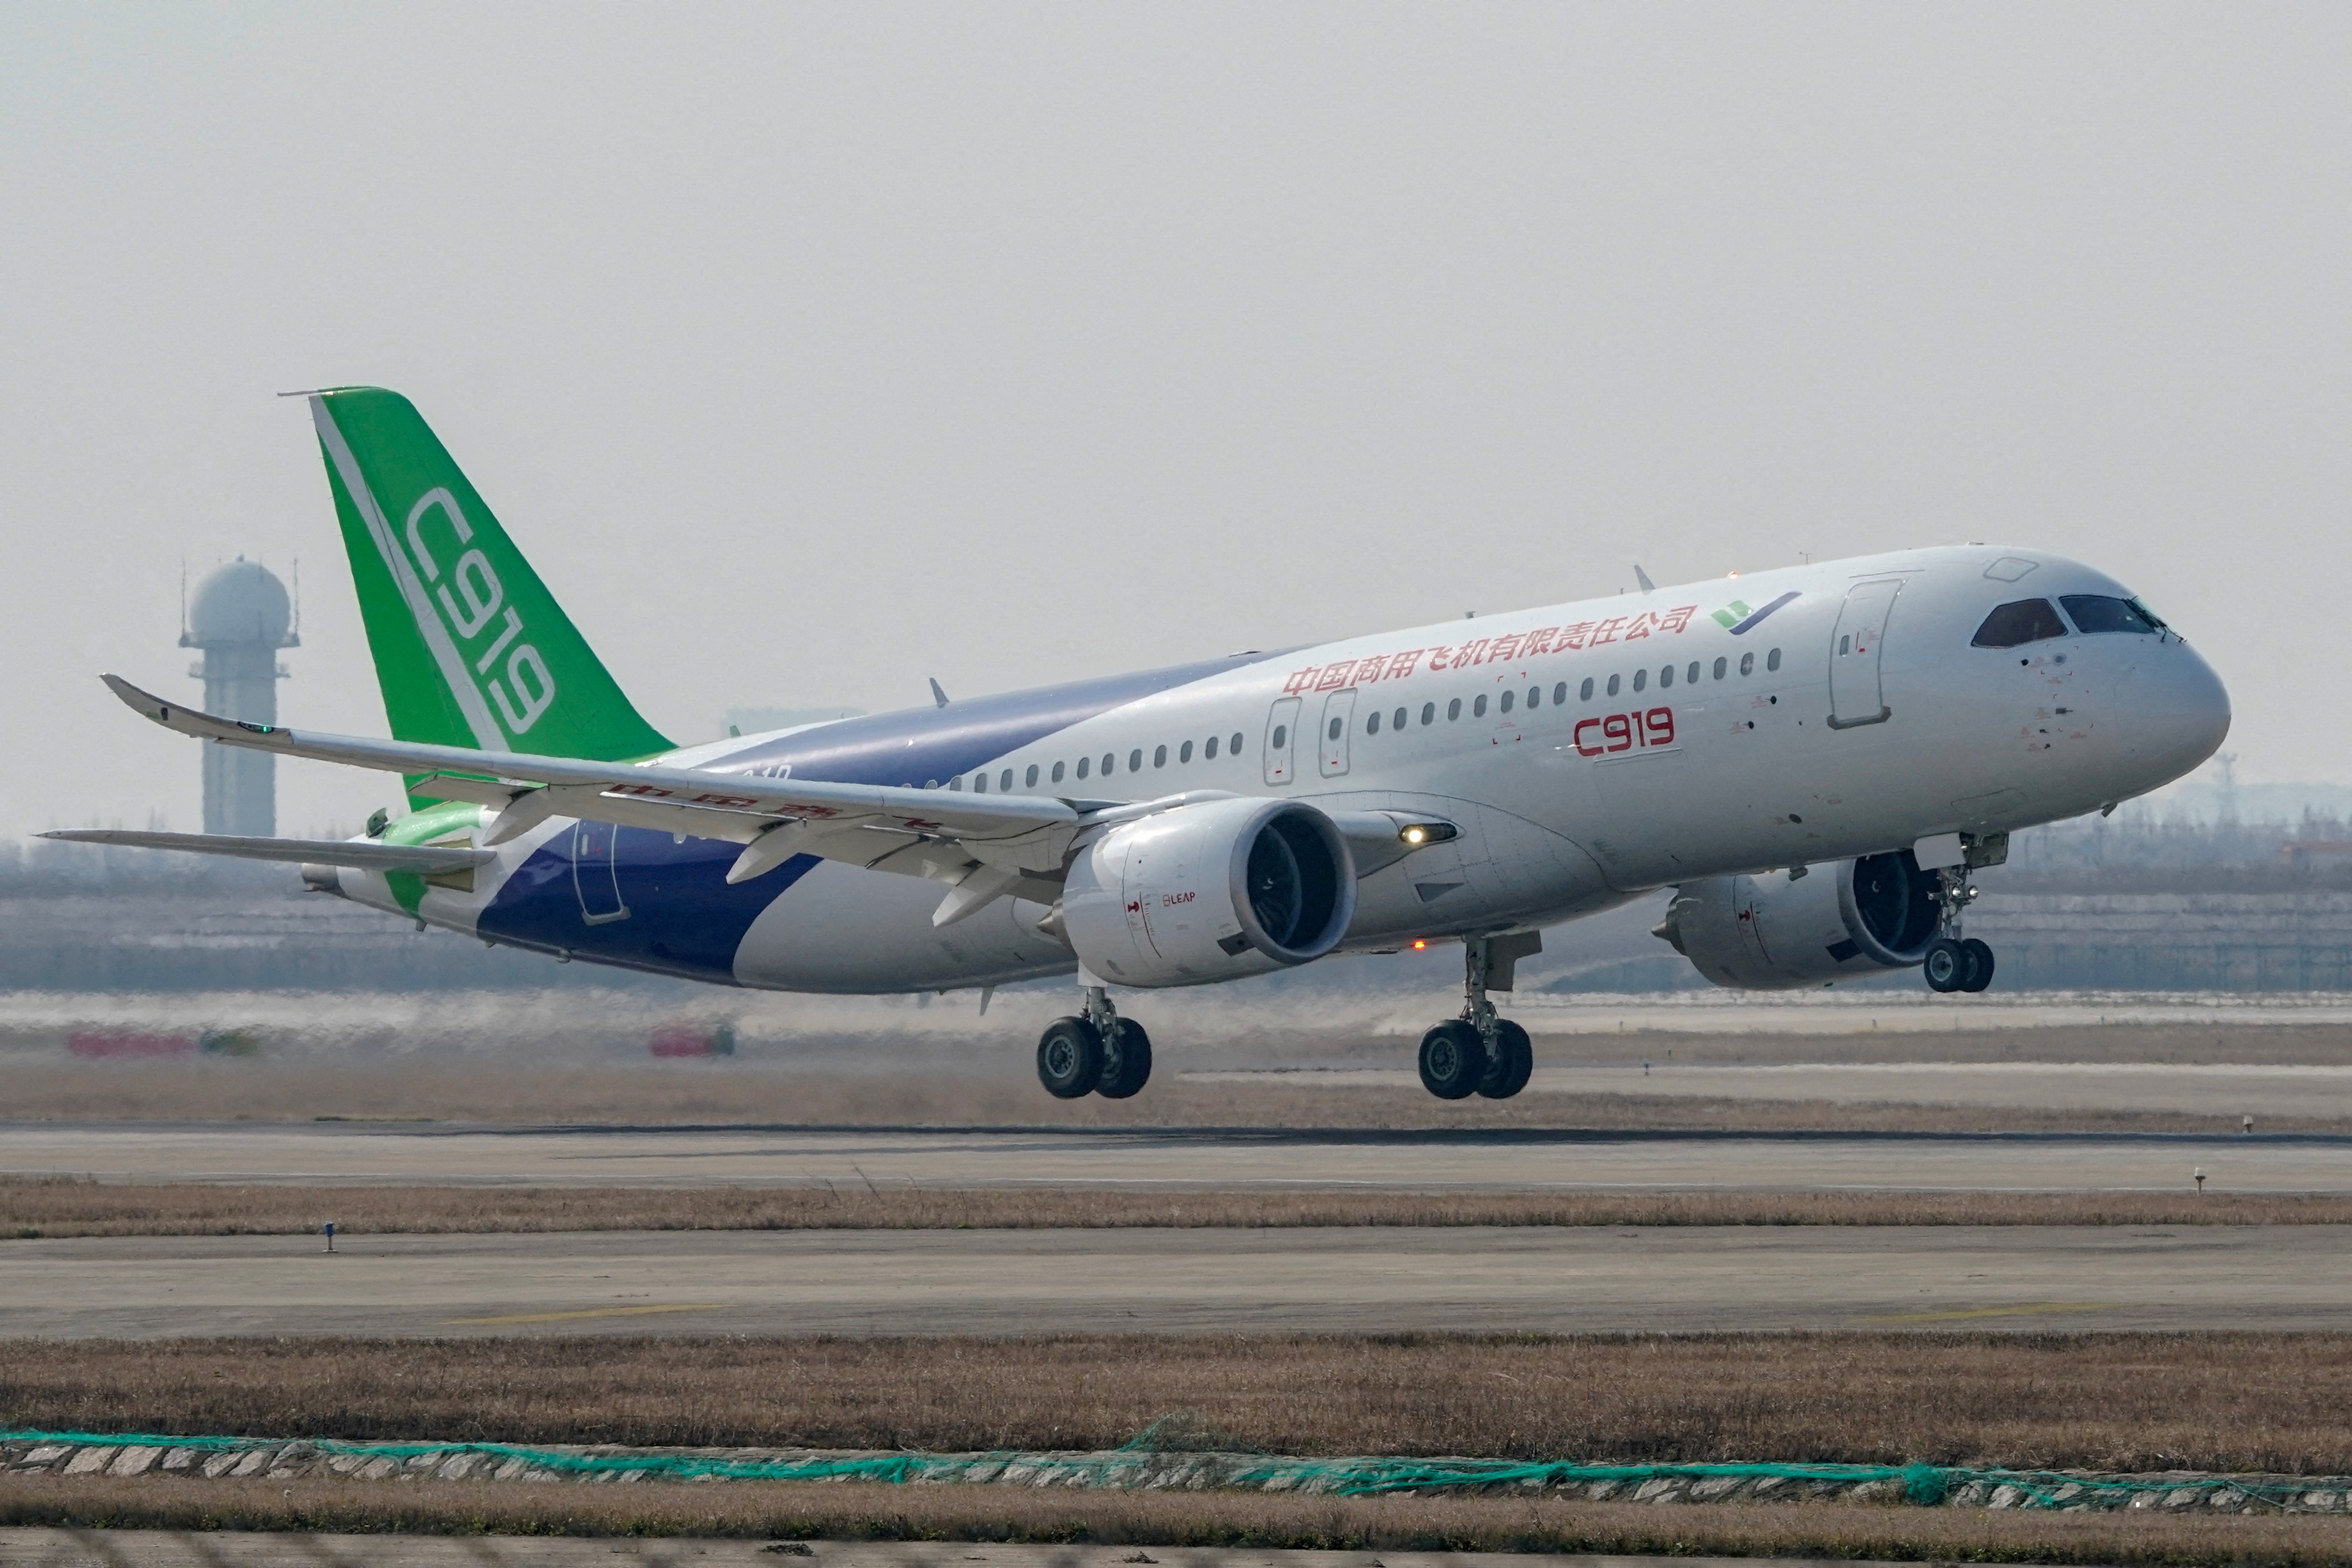 The third prototype of China's home-built passenger jet C919 takes off during its first test flight at Shanghai Pudong International Airport